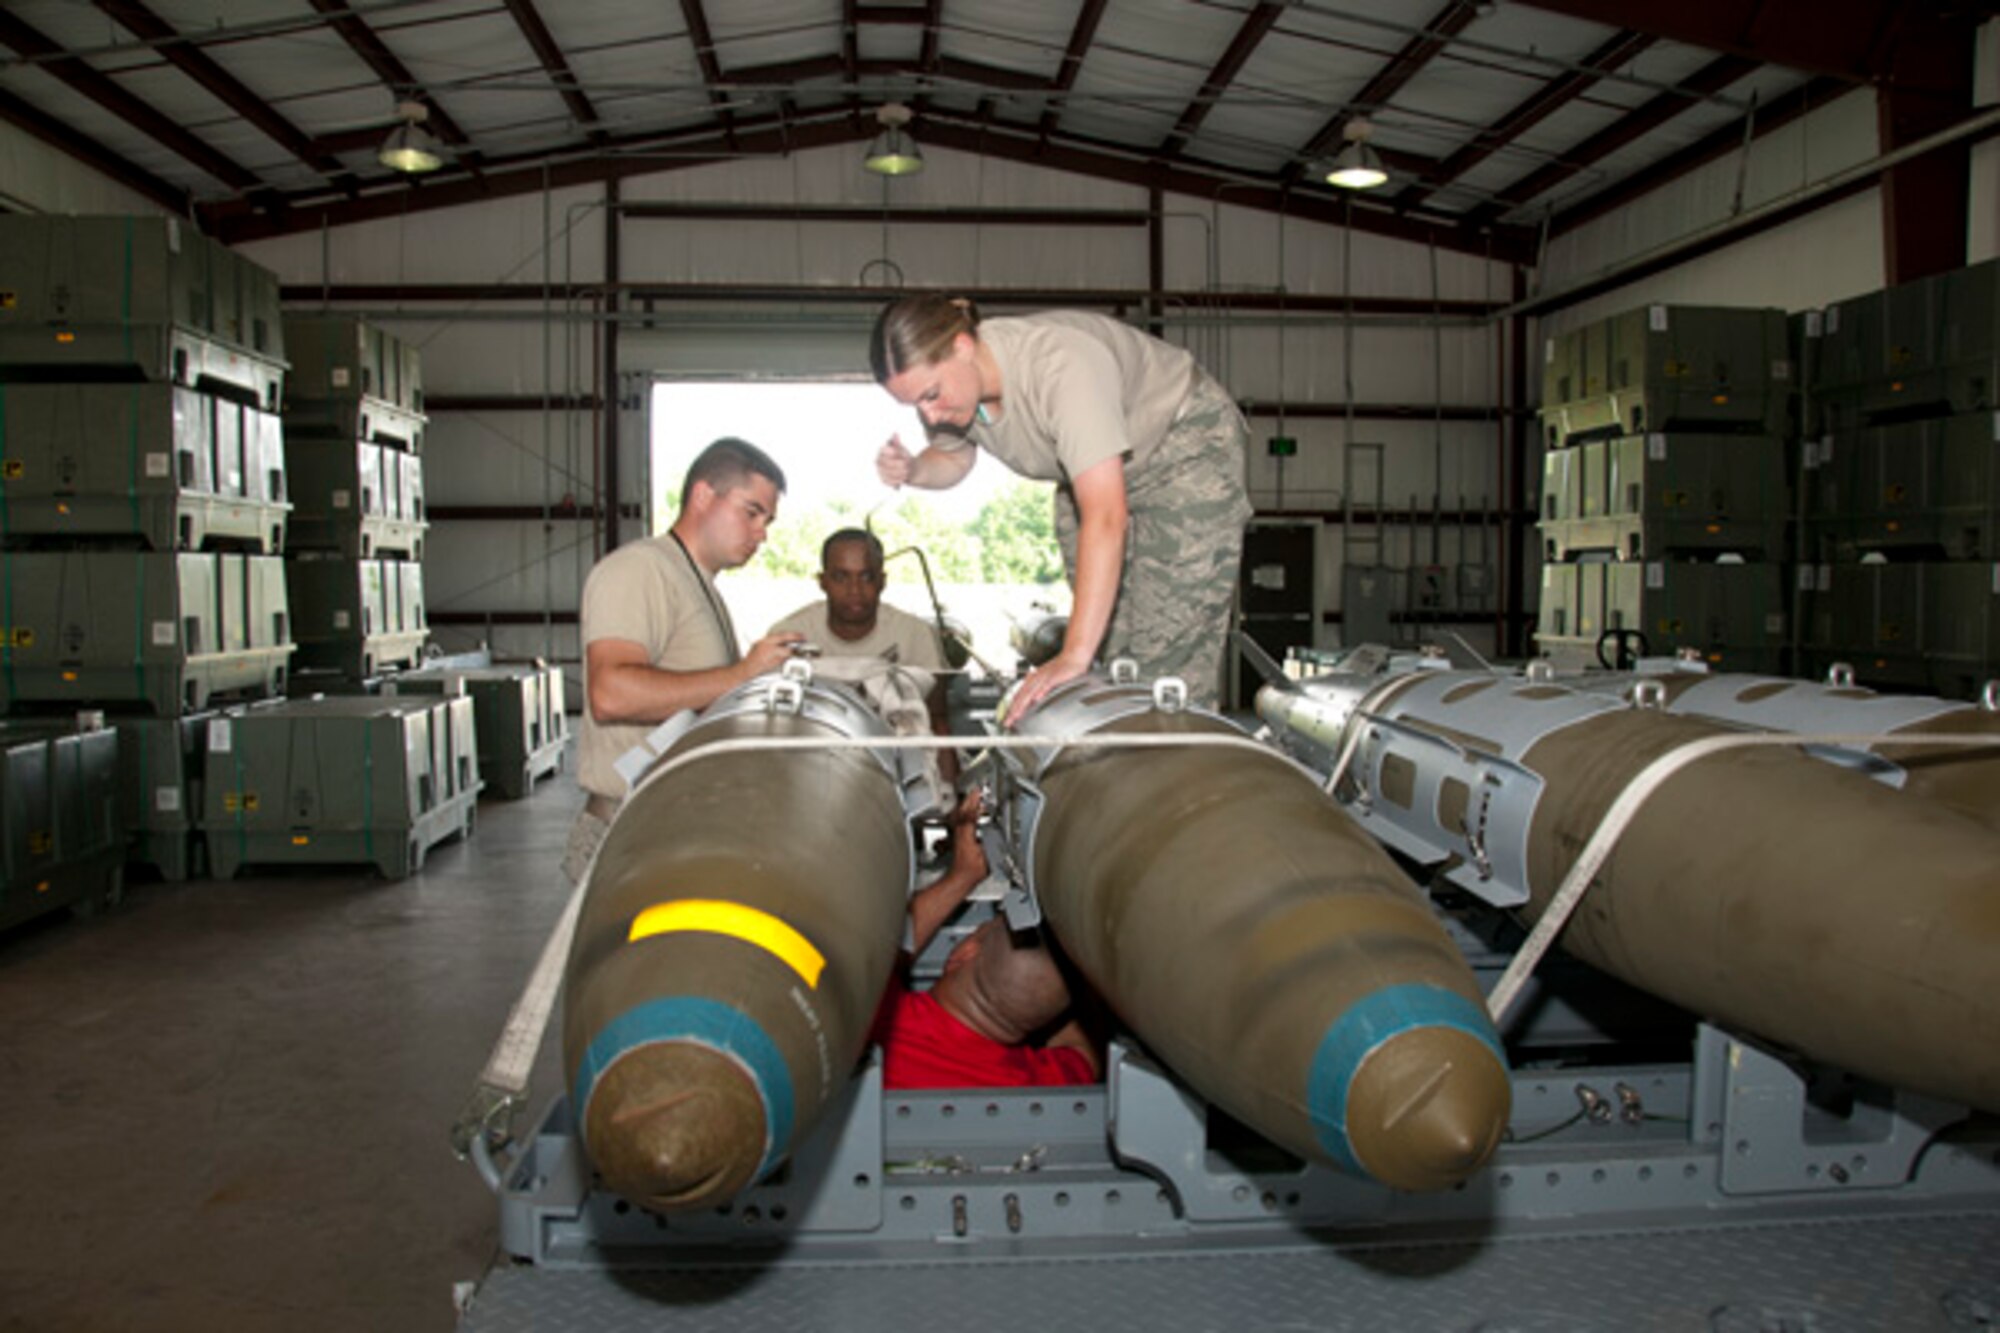 Virginia Air National Guard Tech. Sgt. Kenneth Stanley, Staff Sgt. Louis Jackson and Staff Sgt. Kerri White, 192nd Maintenance Squadron ordnance maintenance mechanics, and U.S. Air Force Airman 1st Class Randal Trosky, 1st Maintenance Squadron ordinance maintenance mechanic, train together as a team by building eight Mark 83 inert bombs during an exercise on July 10, 2016 at Joint Base Langley-Eustis, Virginia. This exercise will support the commemoration of Maj. Gen. Billy Mitchell’s bombing of the German battleship, SMS Ostfriesland, off of the Virginia Capes, July 1921. Billy Mitchell, who is often referred to as the Father of the Air Force, sunk the SMS Ostfriesland to prove a case for the power of an independent air service. (U.S. Air National Guard photo by Master Sgt. Carlos J. Claudio)